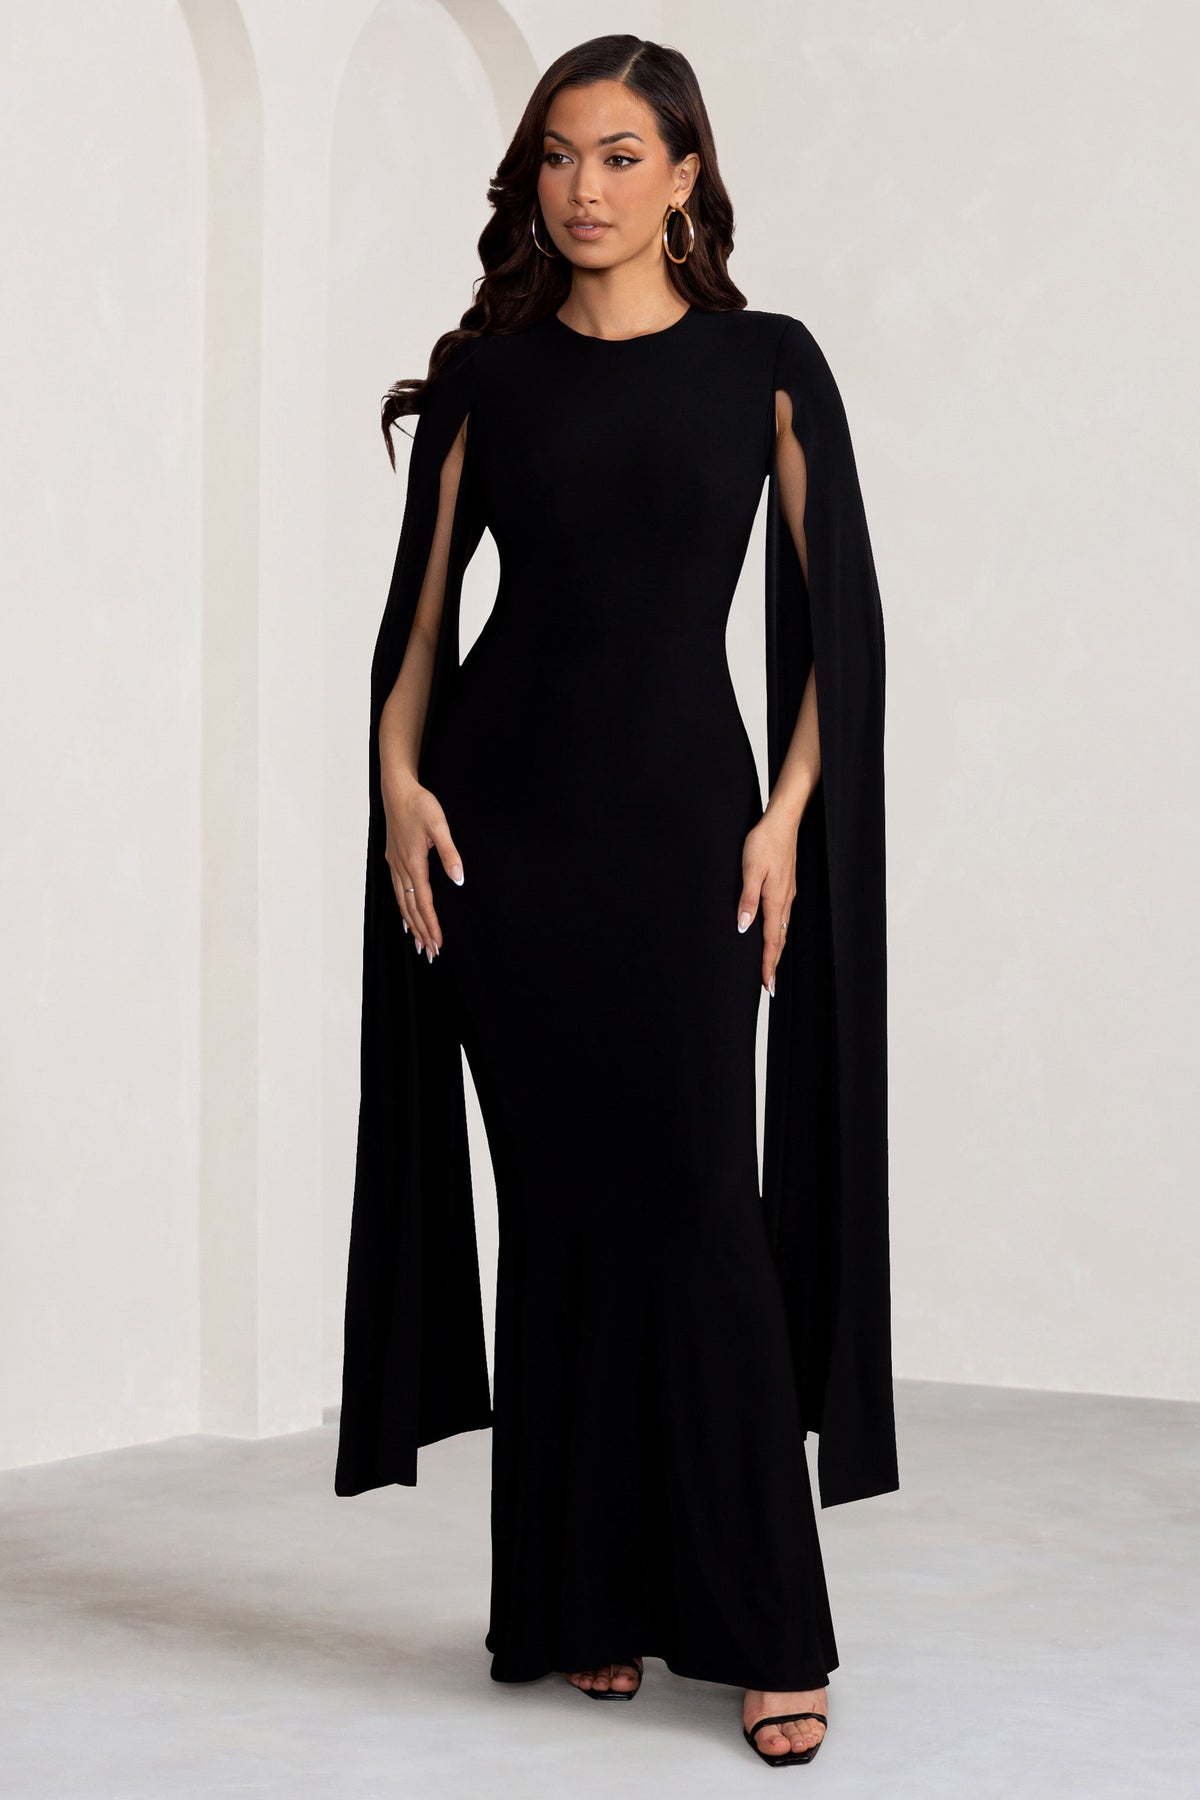 Open Front & Back High-Neck Sexy Long Dress 6805H